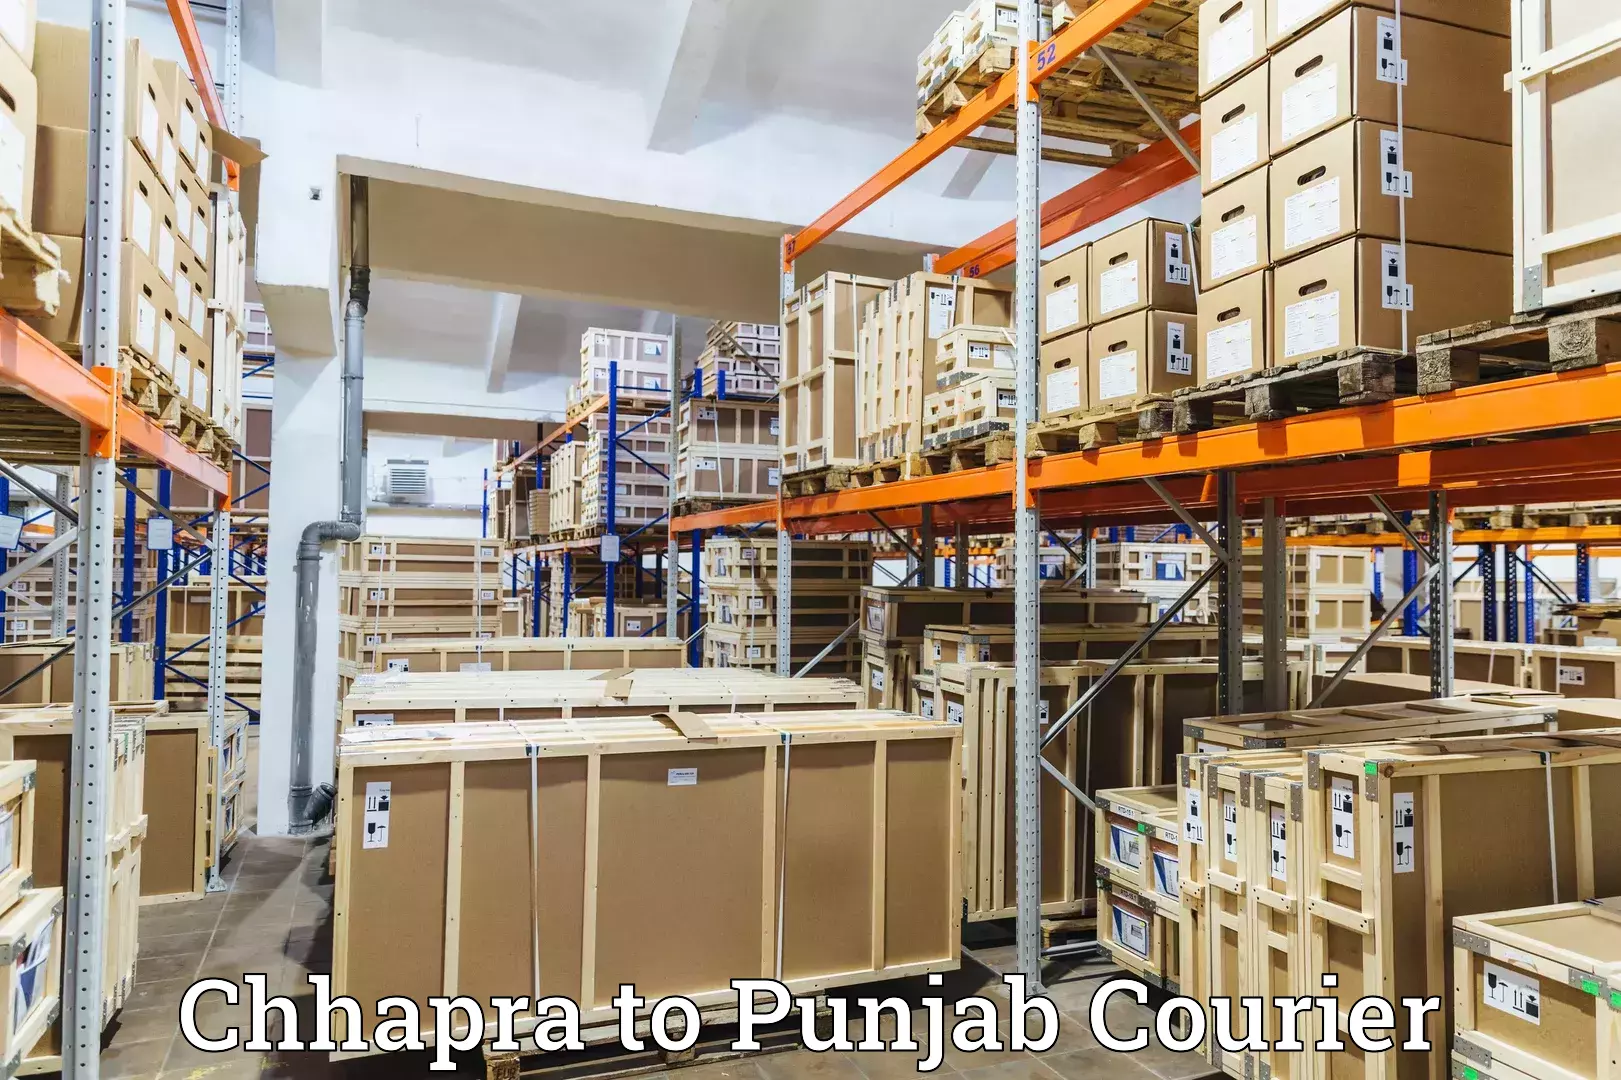 Customizable delivery plans Chhapra to Punjab